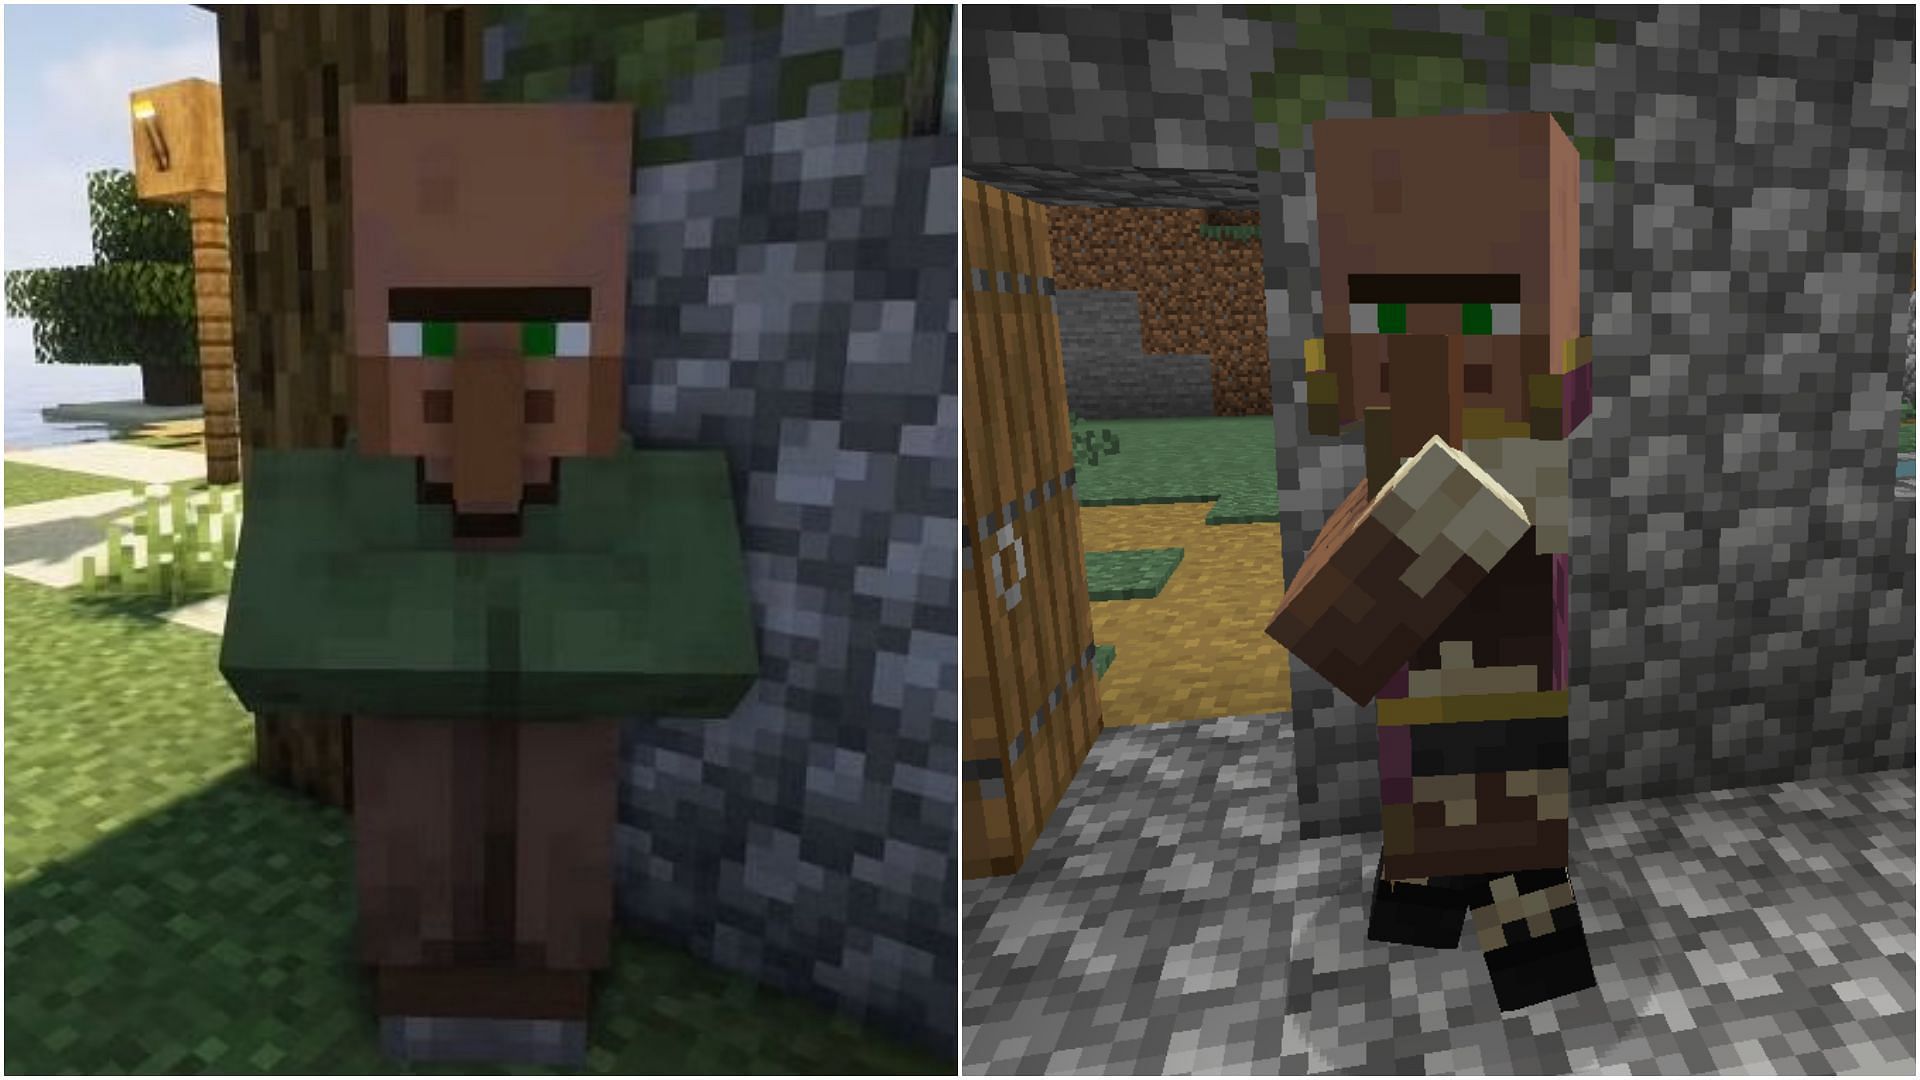 There is a visual difference between nitwit and regular villagers in Minecraft (Image via Sportskeeda)